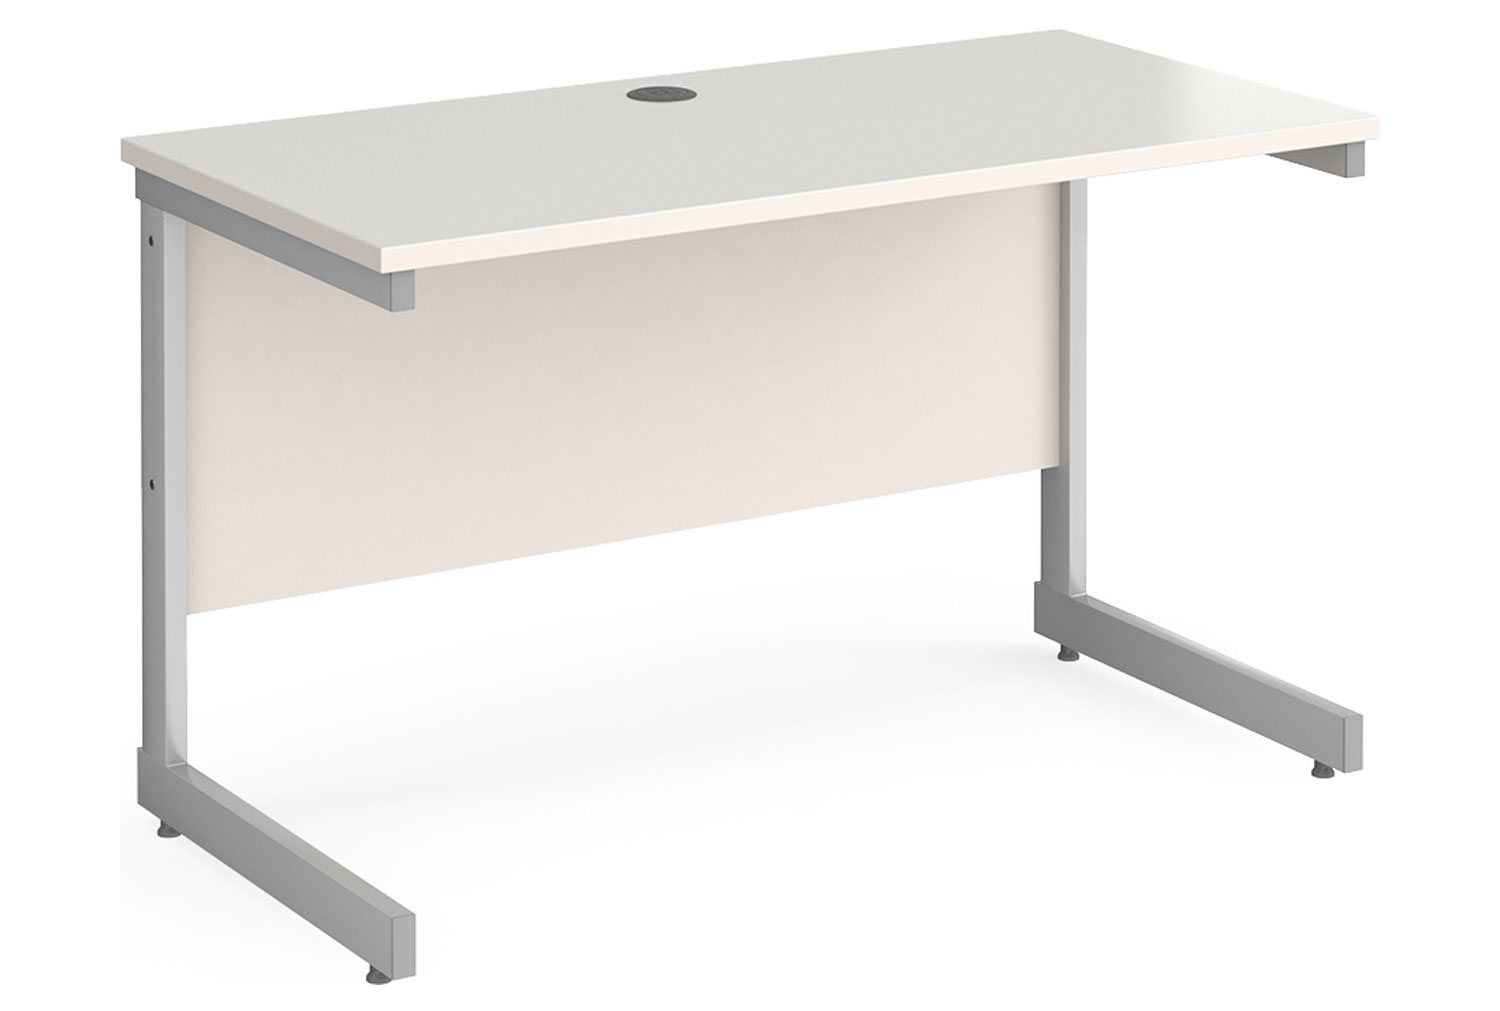 Tully I Narrow Rectangular Office Desk, 120w60dx73h (cm), White, Express Delivery